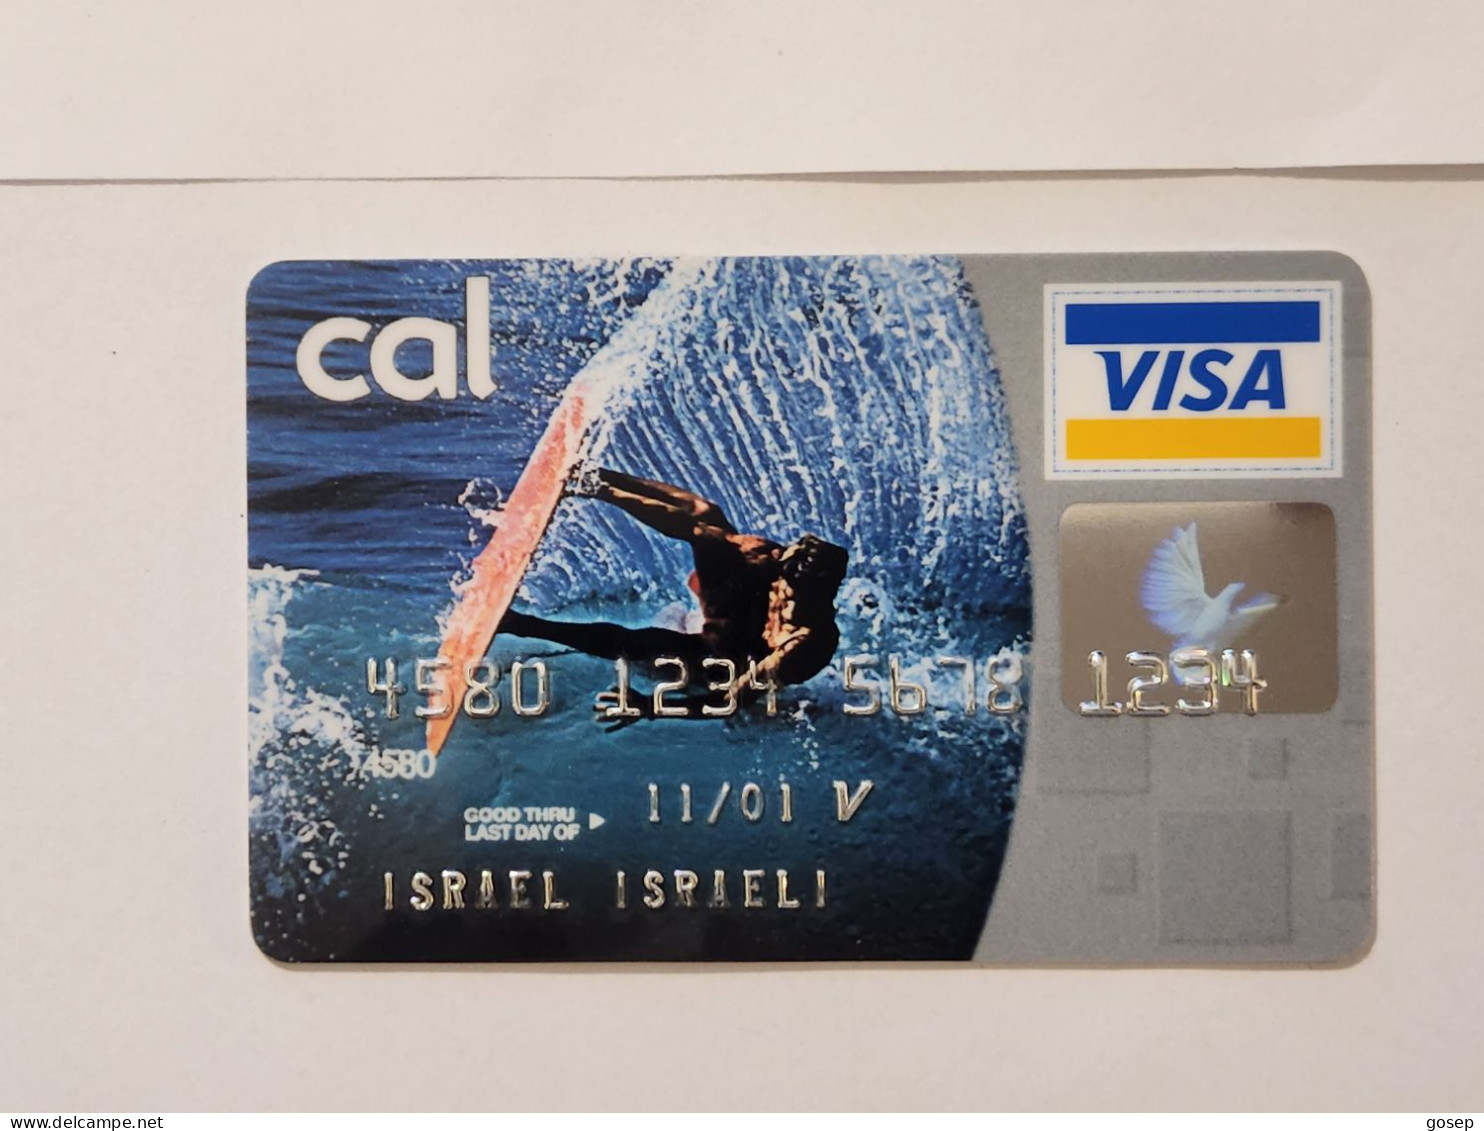 ISRAEL-CALL VISA ELECTRON-(4580-1234-5678-1234)(A Special Rare Experimental Card)-(E)-(01.11.01)-Good Card - Credit Cards (Exp. Date Min. 10 Years)